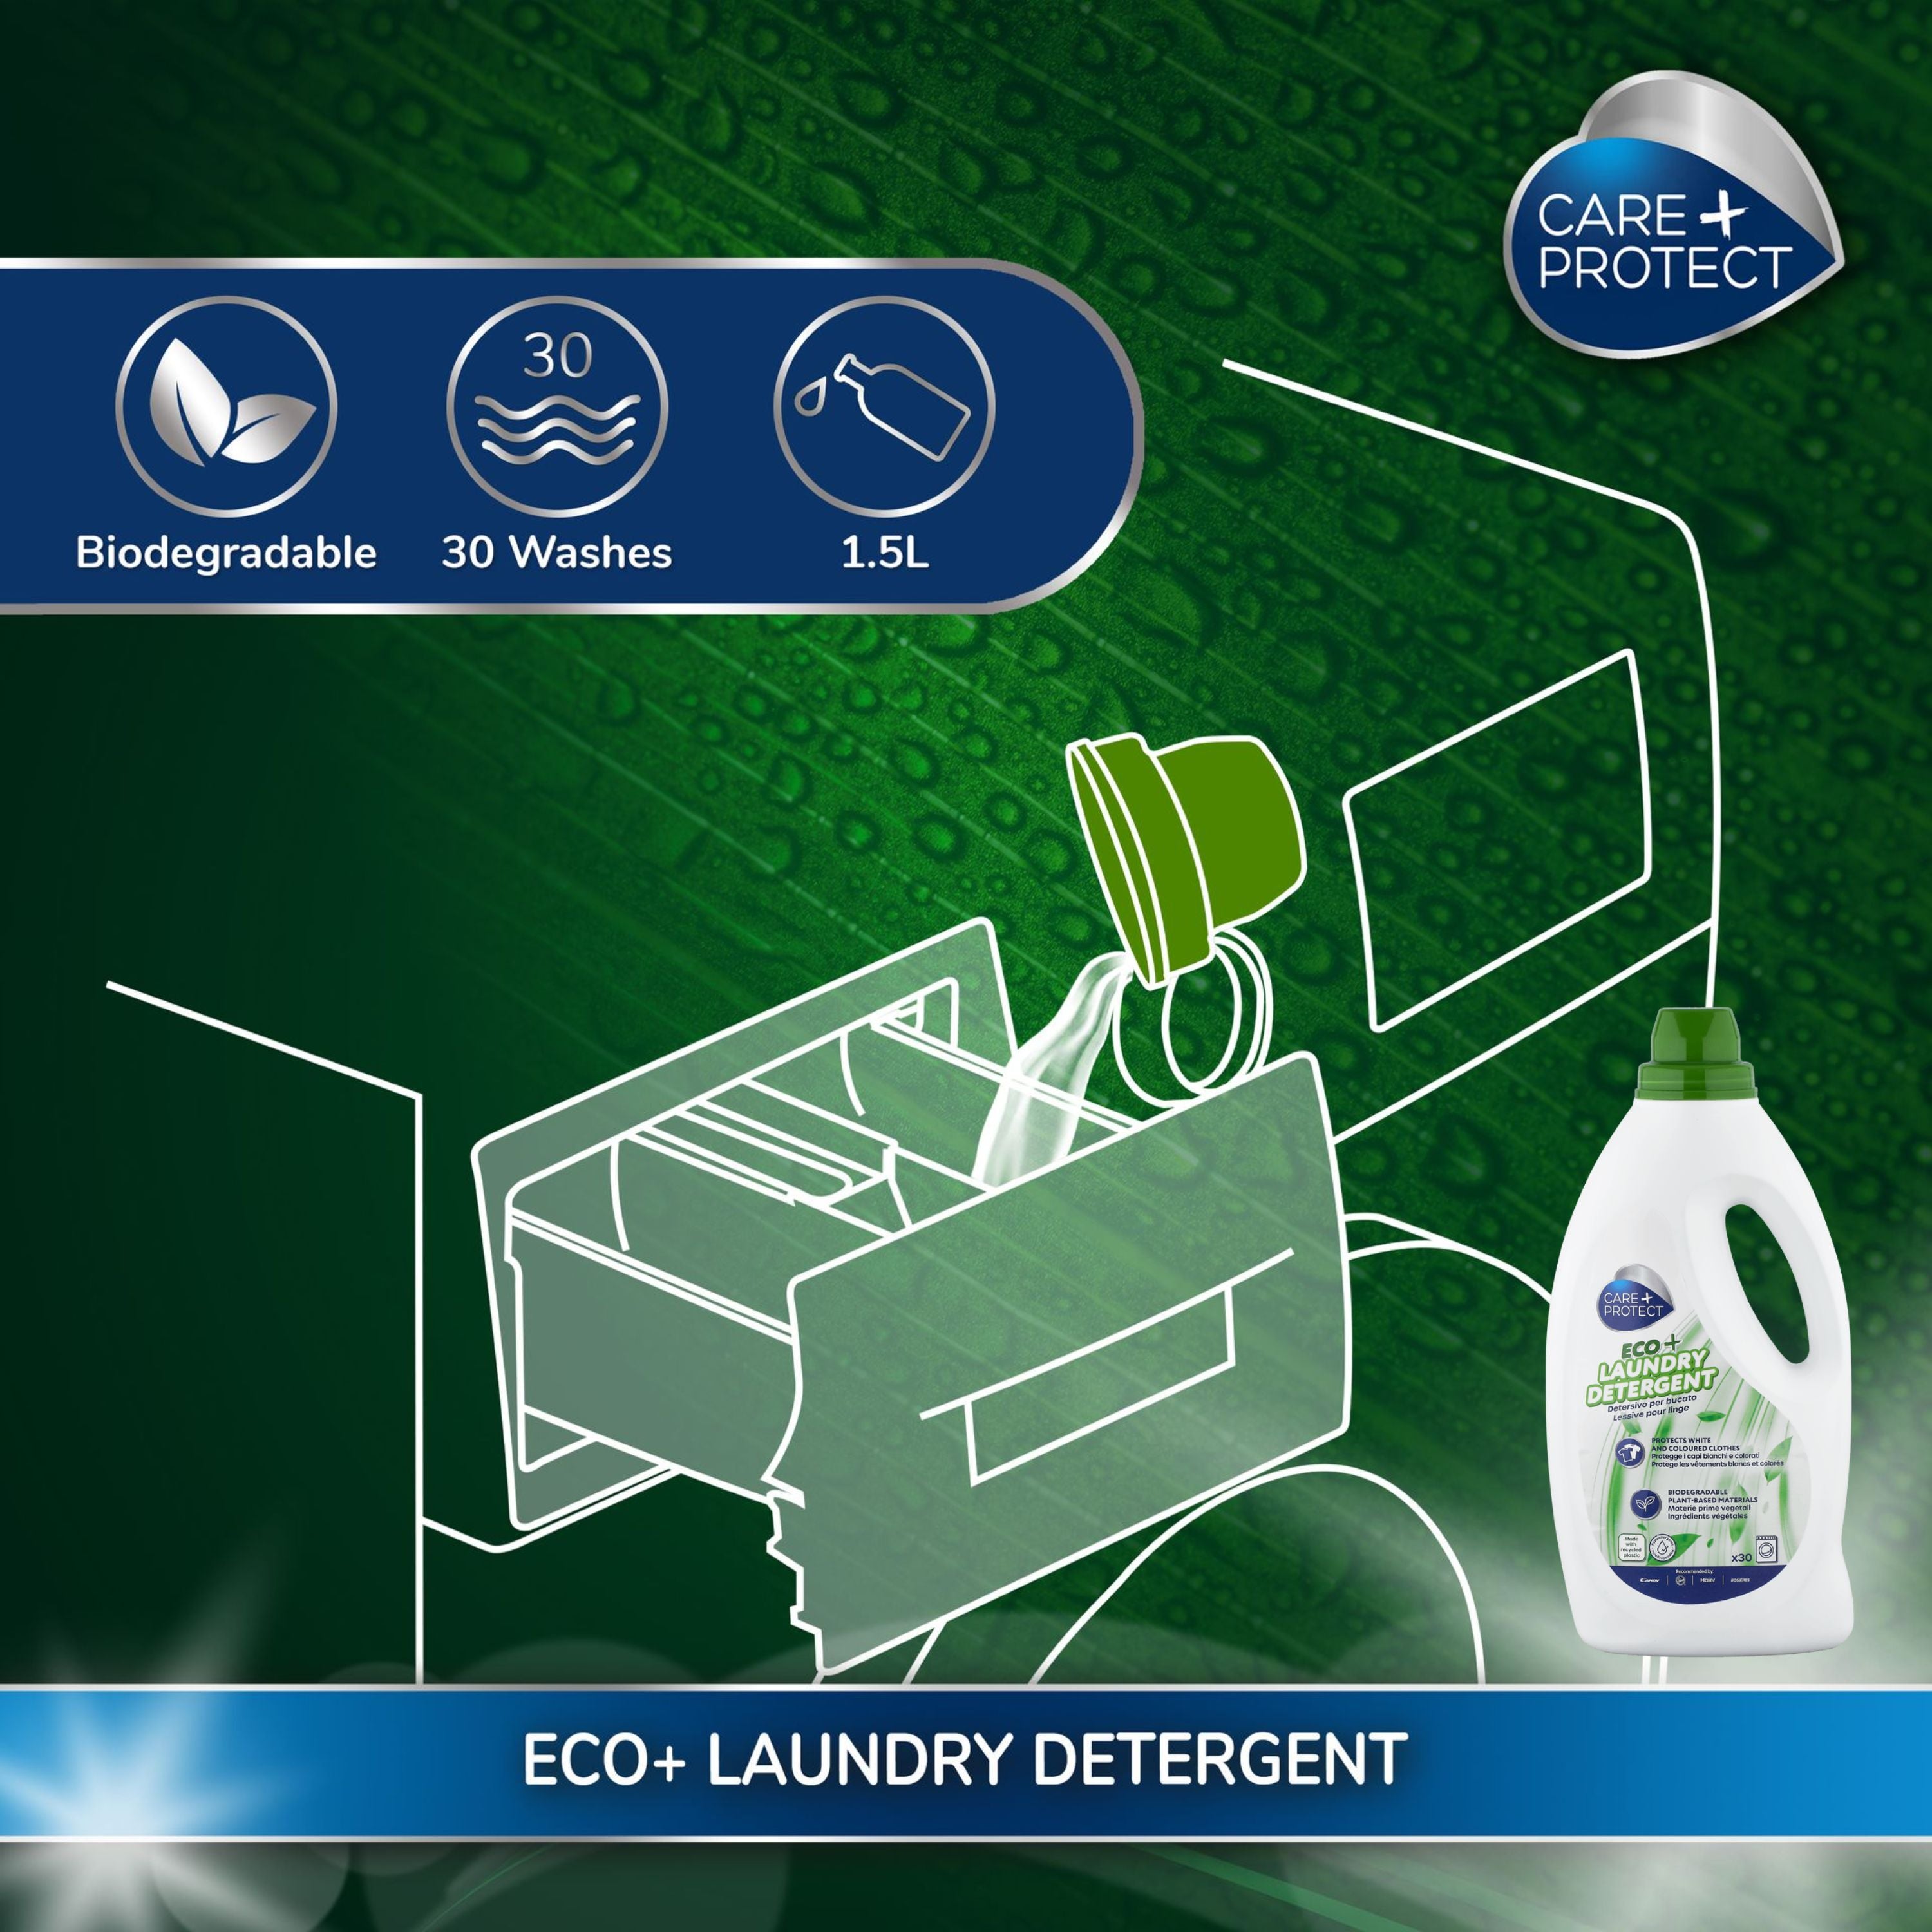 CARE + PROTECT ECO+ Laundry Detergent, for Machine and Hand Washing, White & Coloured Clothes, Effective even at 30° and in Rapid Cycles, Ecolabel Certified, Hypoallergenic, 1500ml for Upto 30 Washes